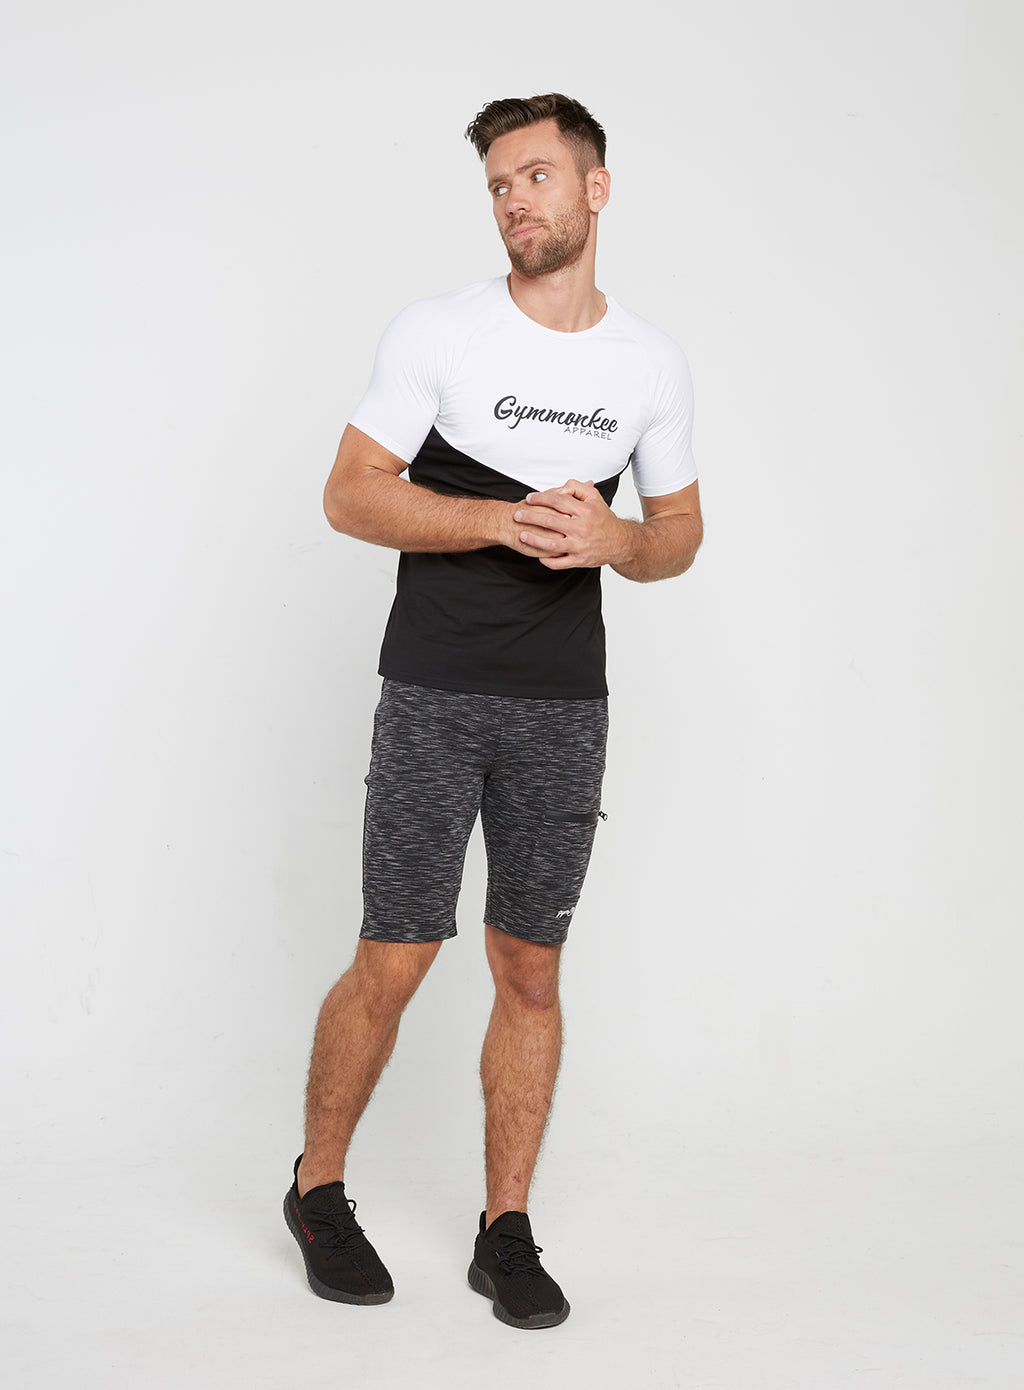 Gym Monkee - Black and White Tee FRONT MOVING